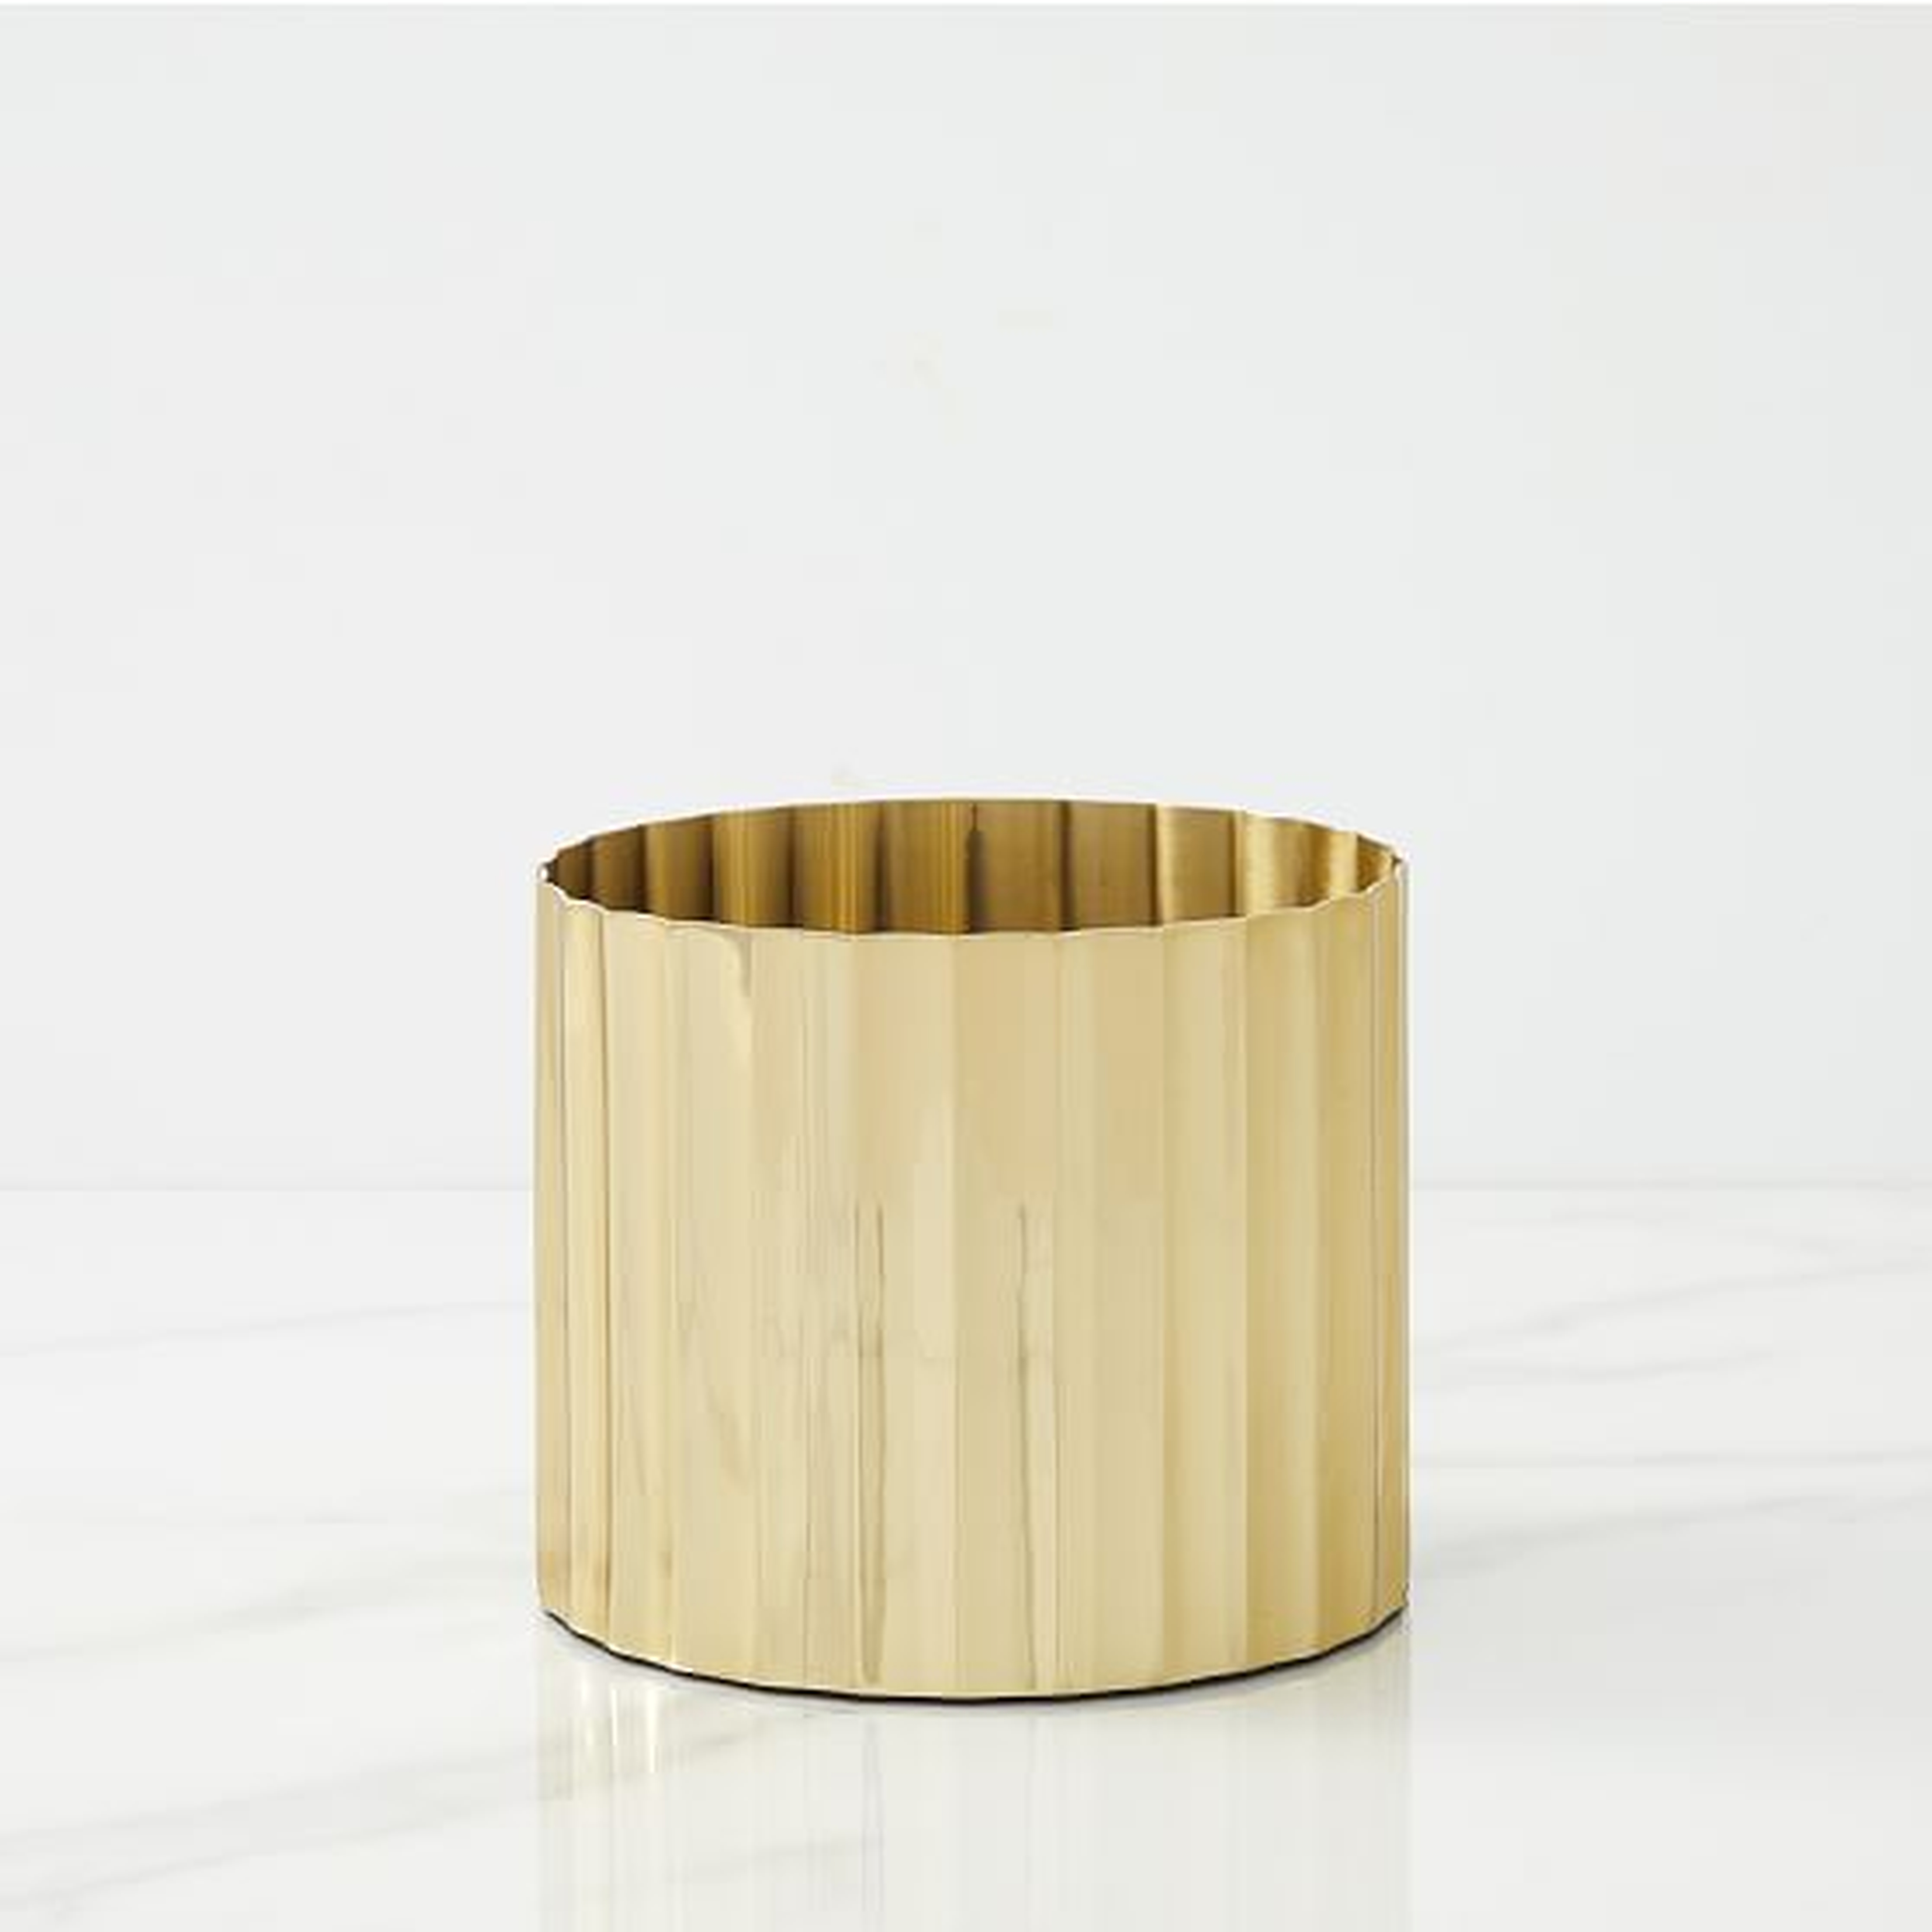 Pure Foundations Metal Tabletop Planters, Small Round, Polished Brass - West Elm